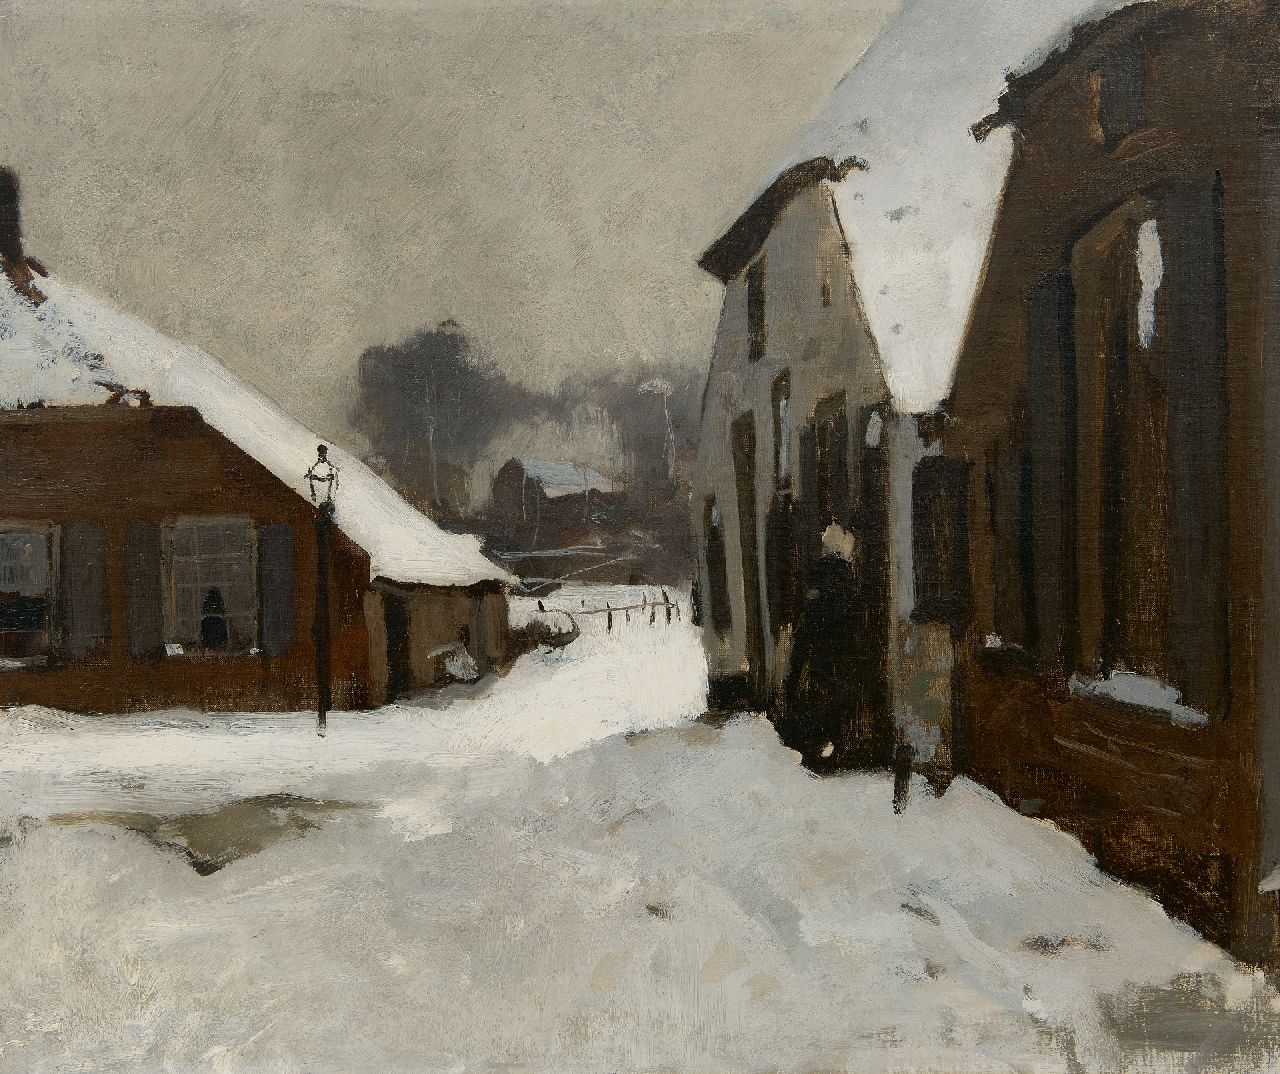 Witsen W.A.  | 'Willem' Arnold Witsen | Paintings offered for sale | Winter in Ede, oil on canvas 55.2 x 66.5 cm, painted ca. 1895-1902